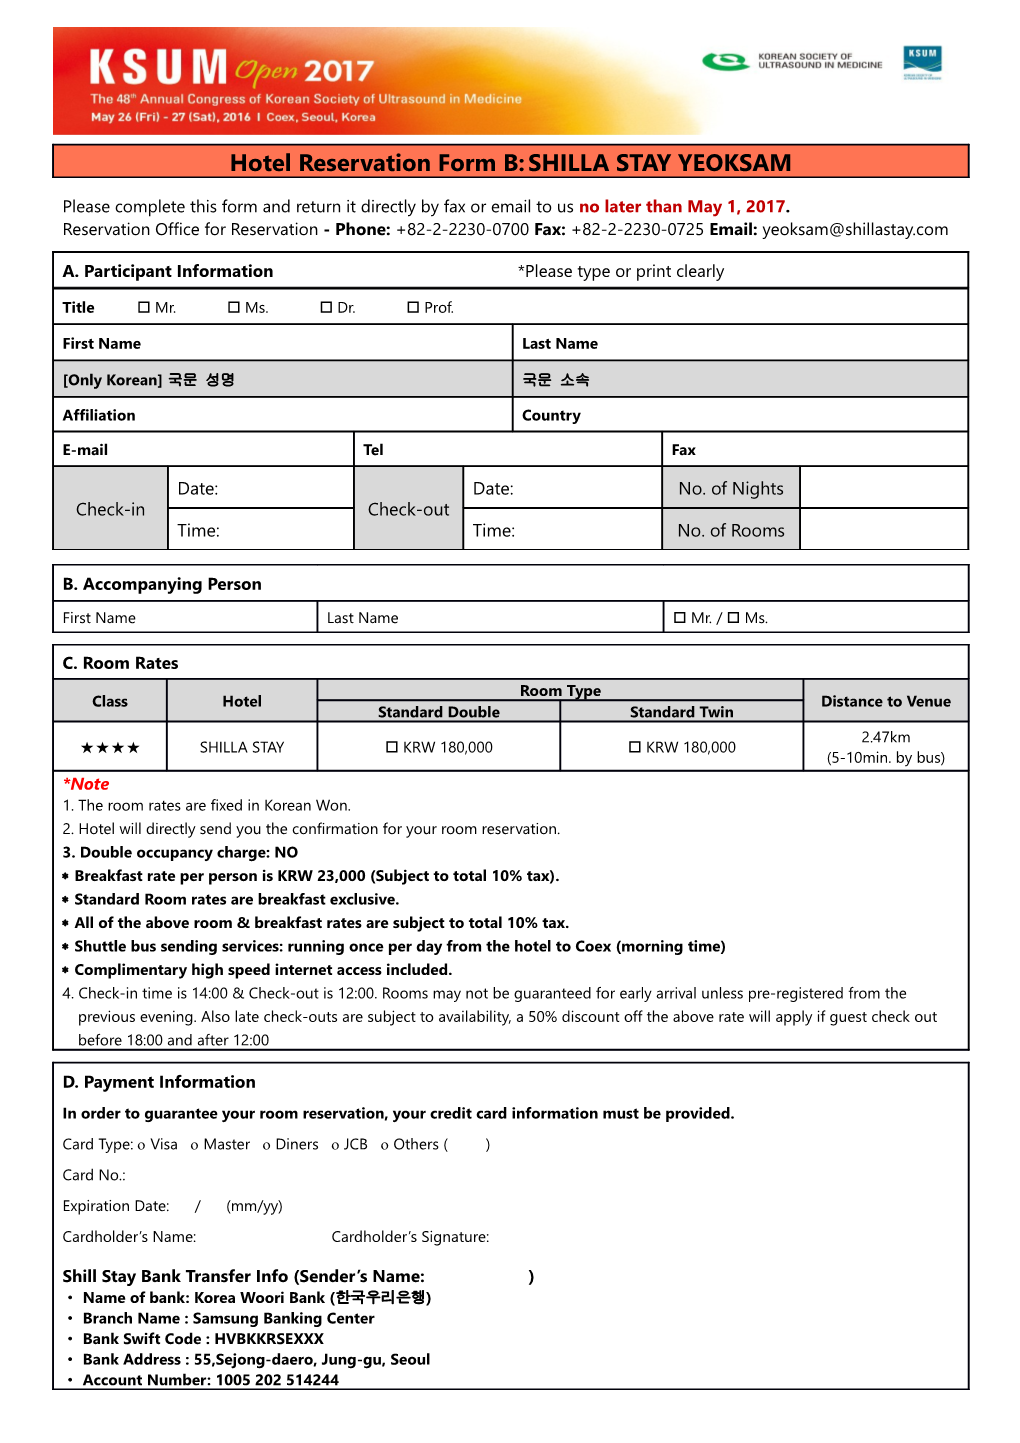 Please Complete This Form and Return It Directly by Fax Or Email to Us No Later Than May1